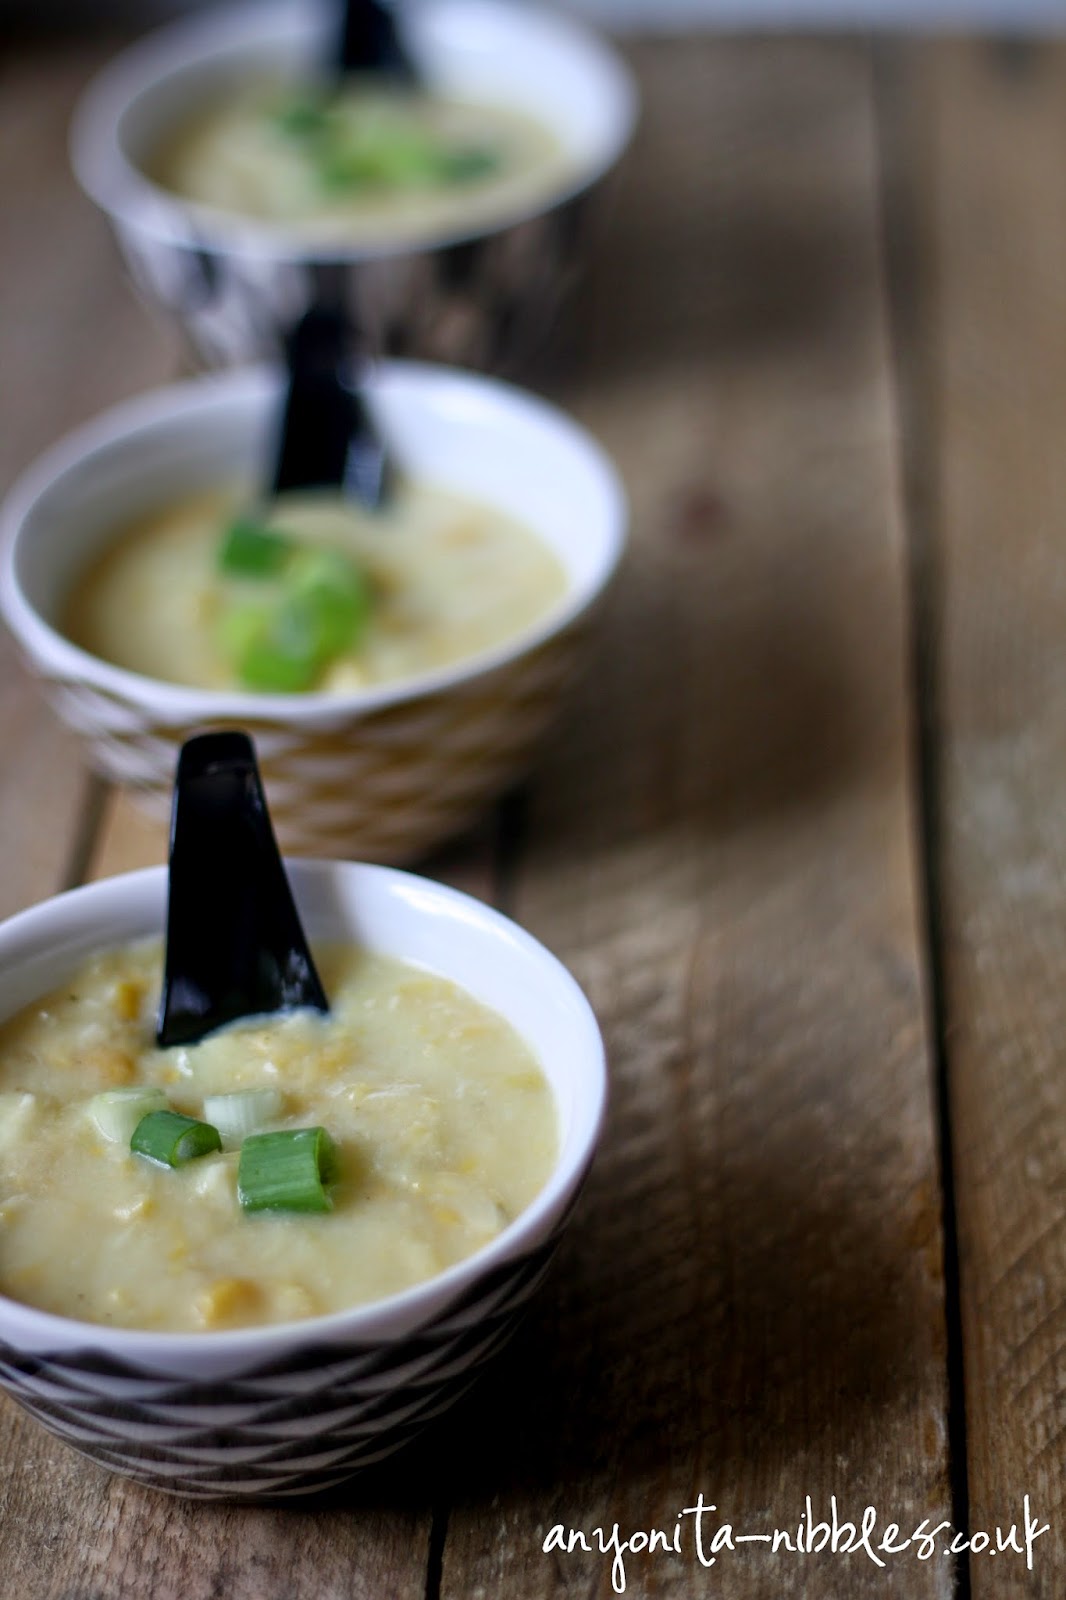 Three bowls of gluten free chicken and sweetcorn soup from Anyonita-nibbles.co.uk